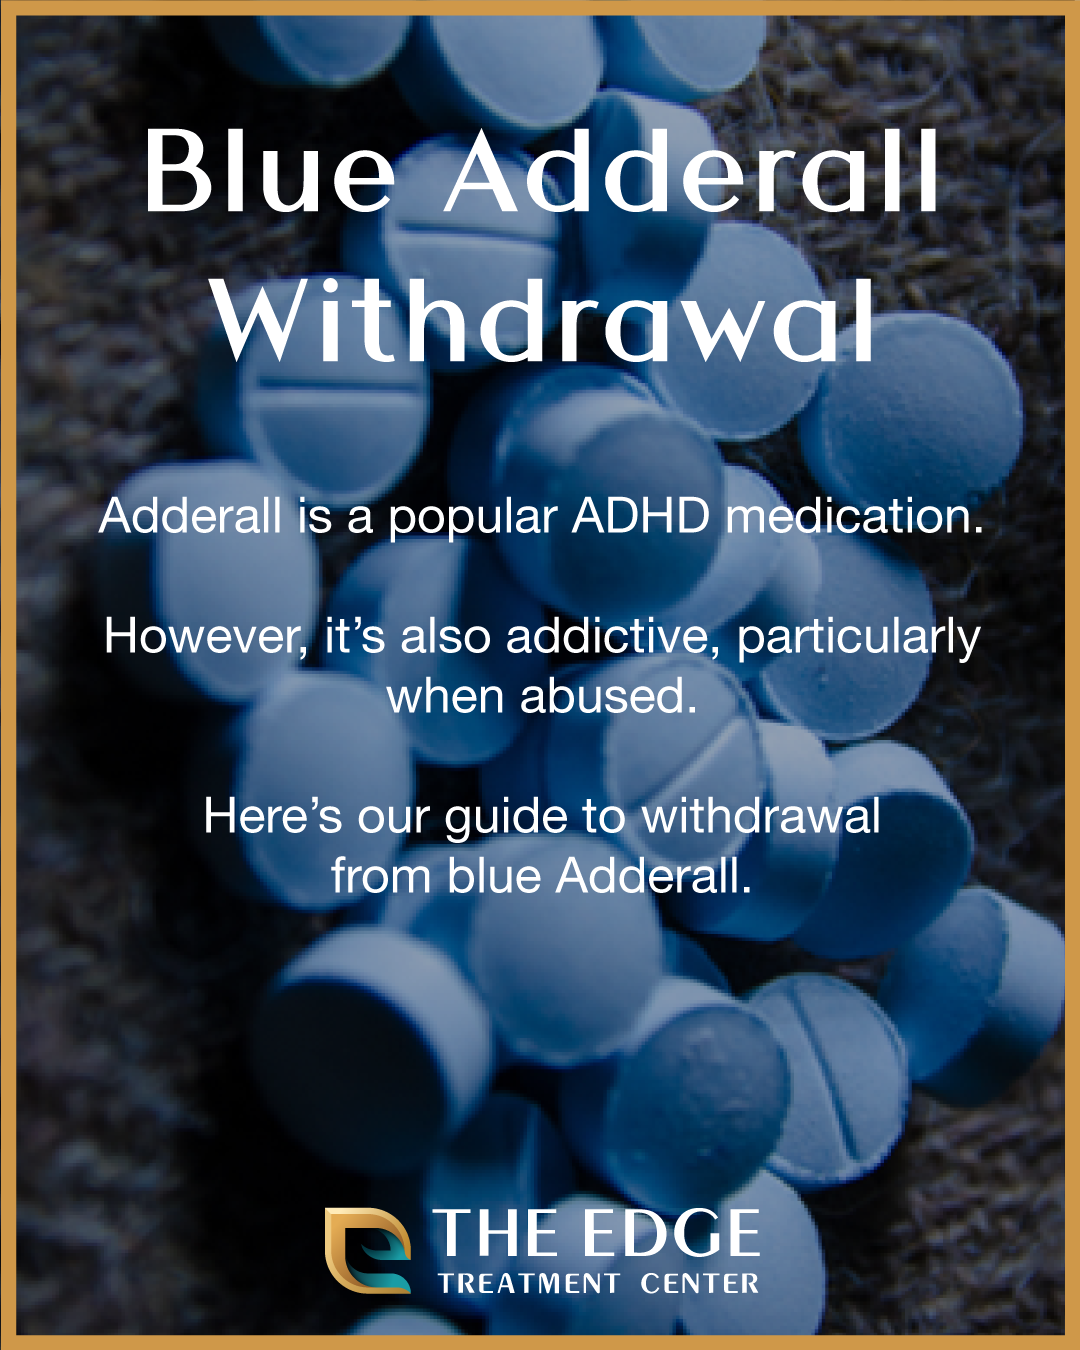 Modafinil Vs Adderall: Which Is Safer To Use?